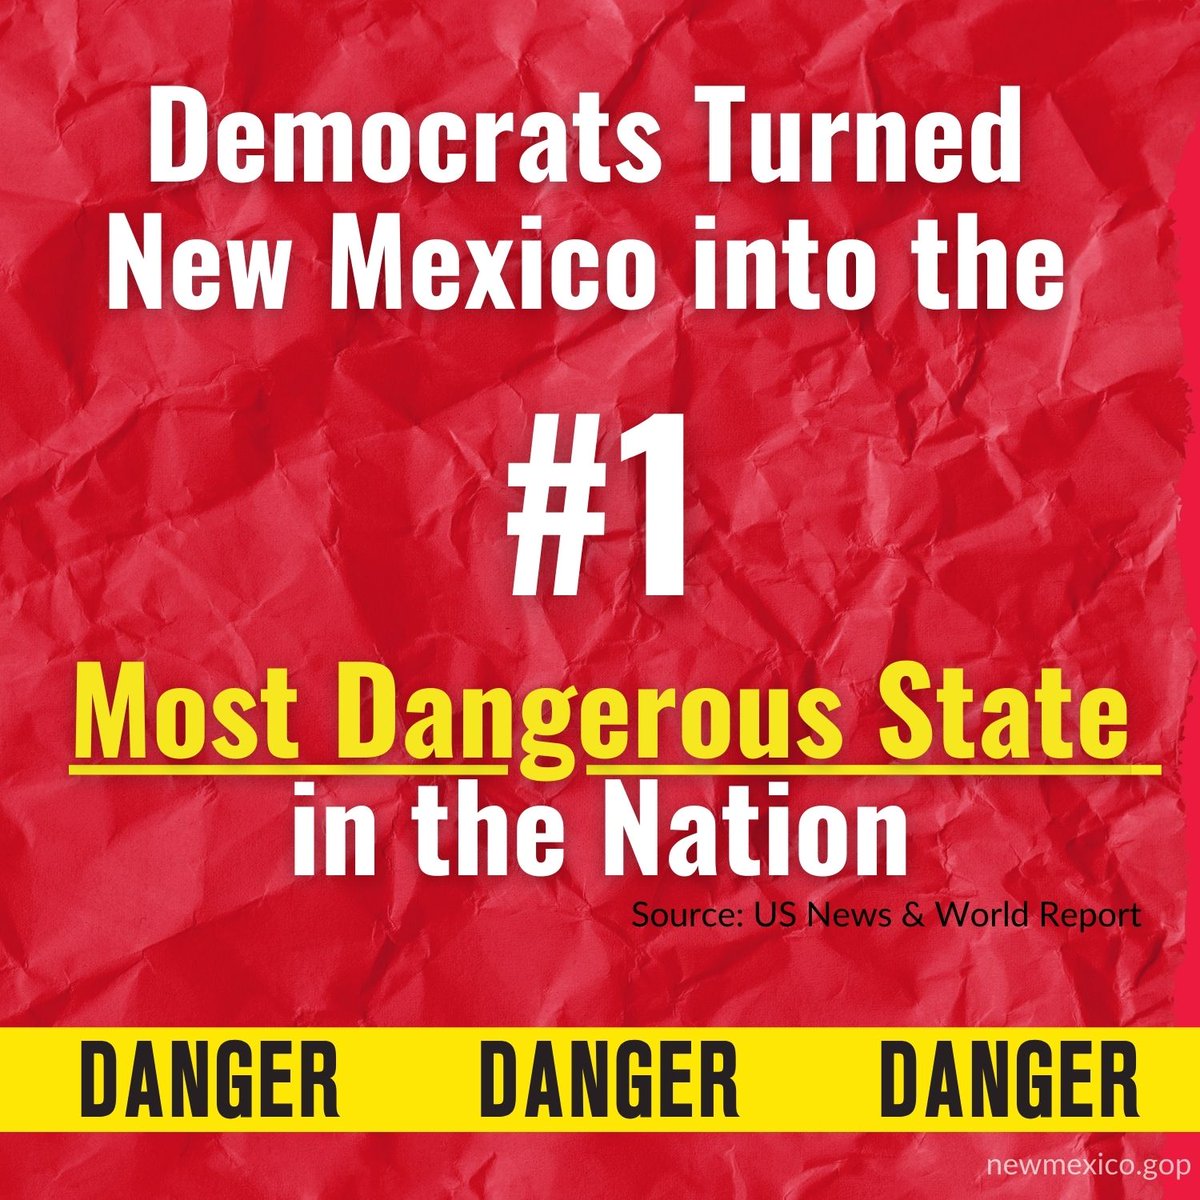 Did you know? New Mexico’s Democratic leadership has hit another milestone for the worst! >>>New Mexico is officially the #1 most dangerous state in America, according to a ranking by U.S. News & World Report. According to the platform, the ranking factors in each state's